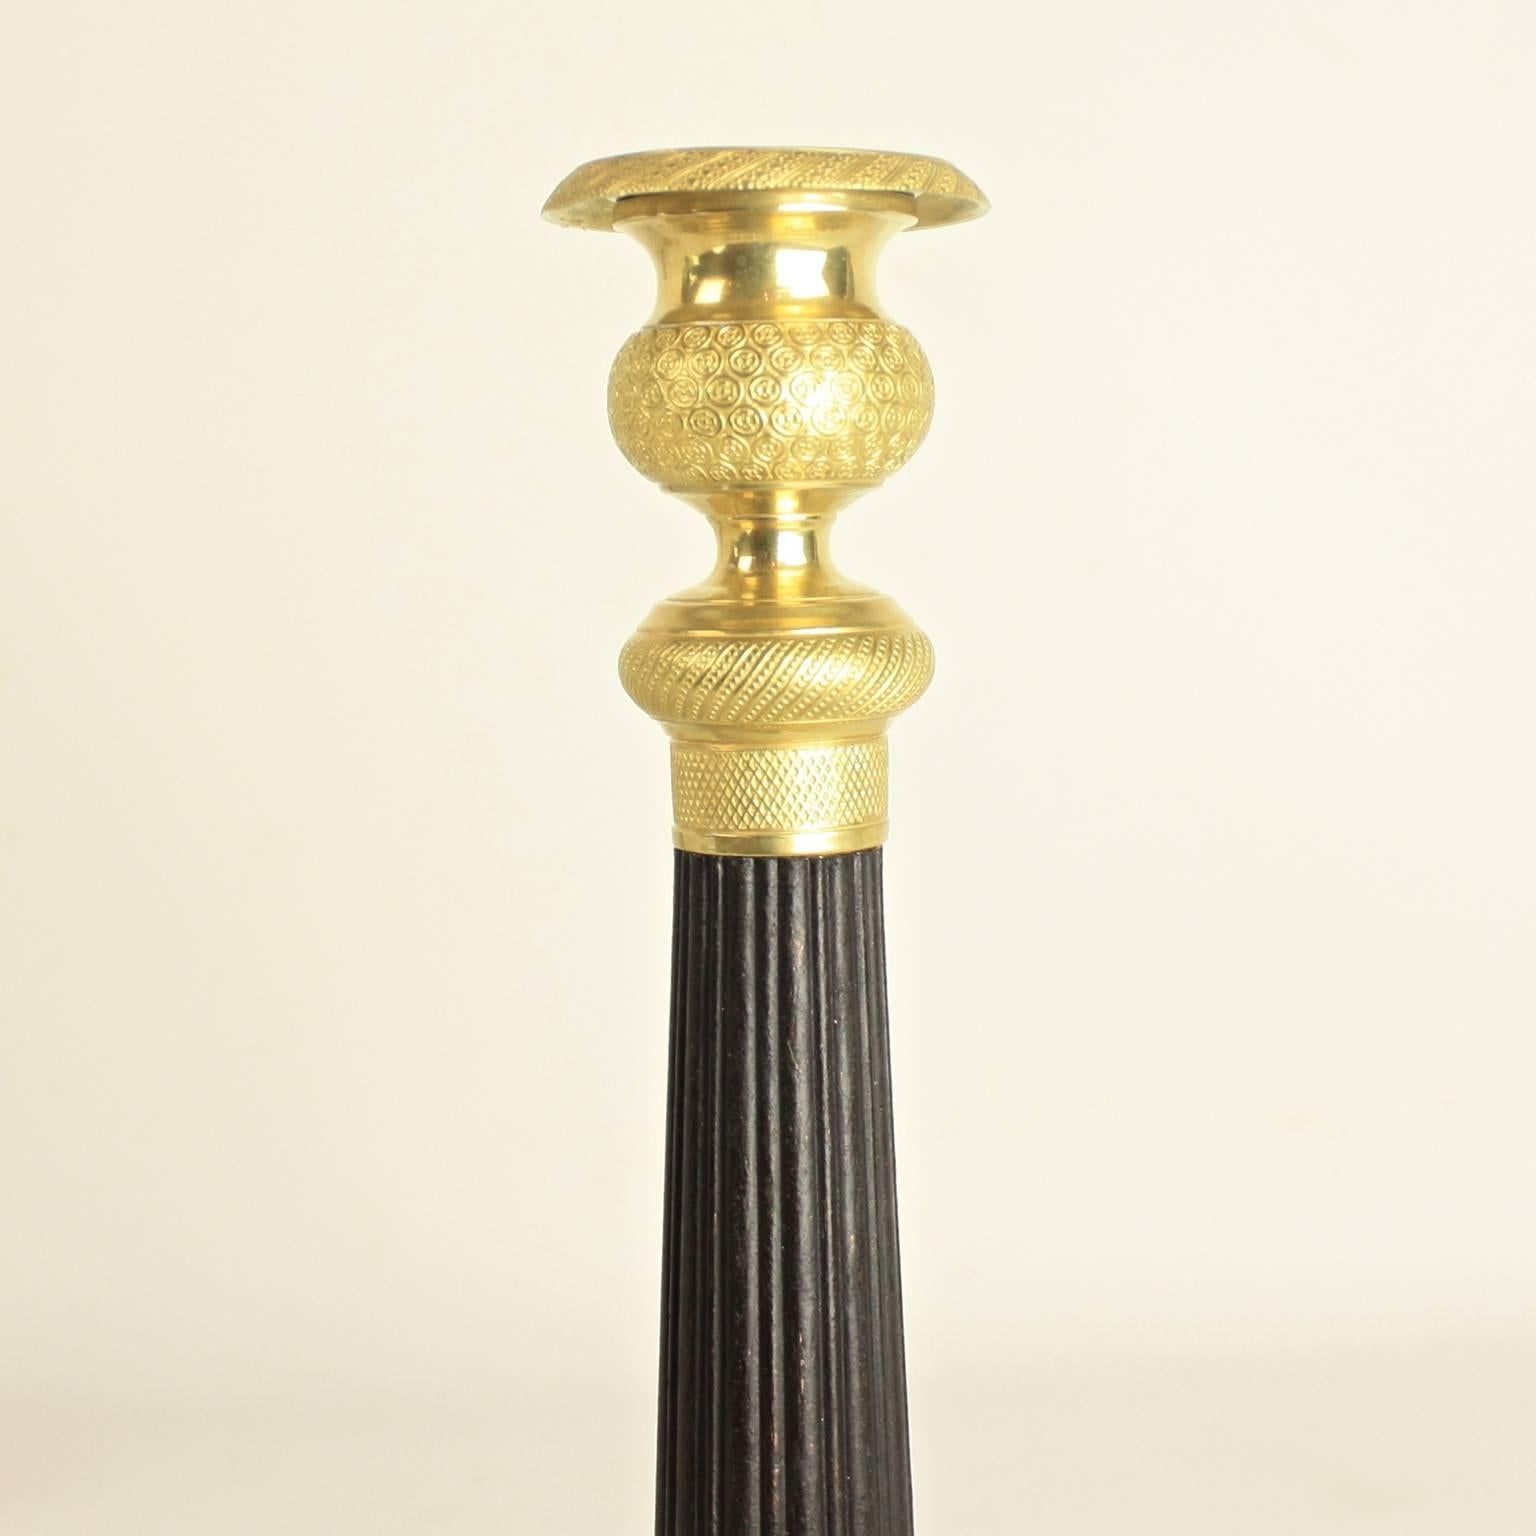 Pair of Charles X-Patinated and Gilt Bronze Candlesticks (Charles X.)